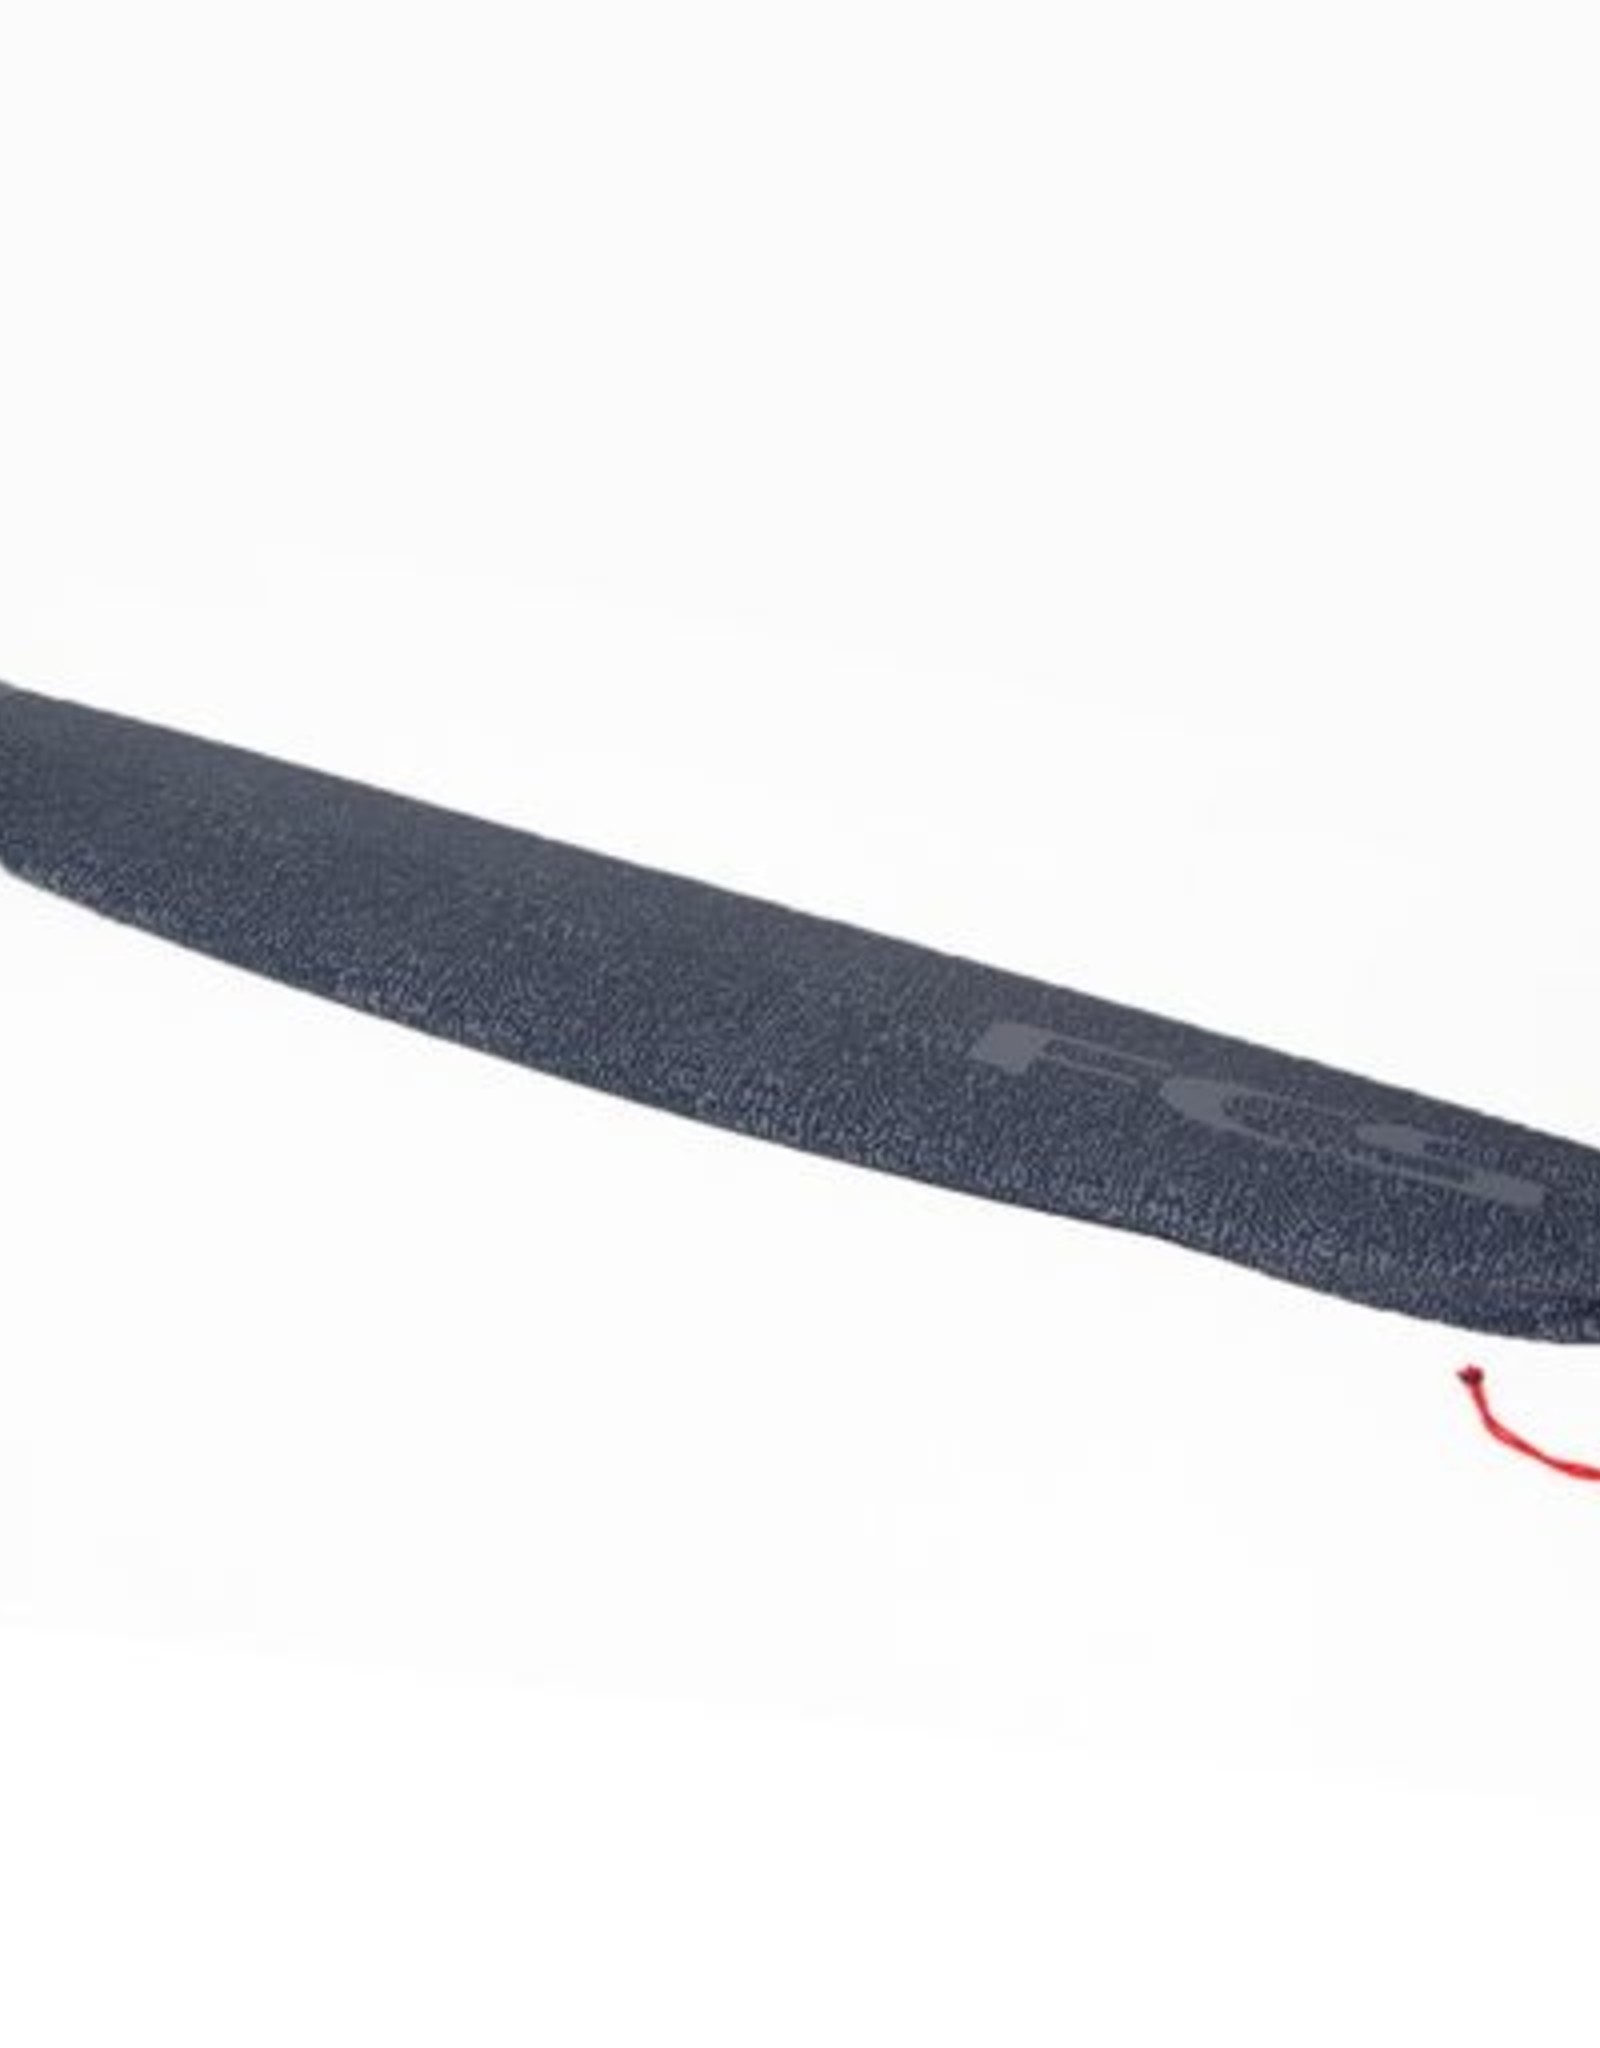 FCS STRETCH LONG BOARD COVER - 9'0" CARBON